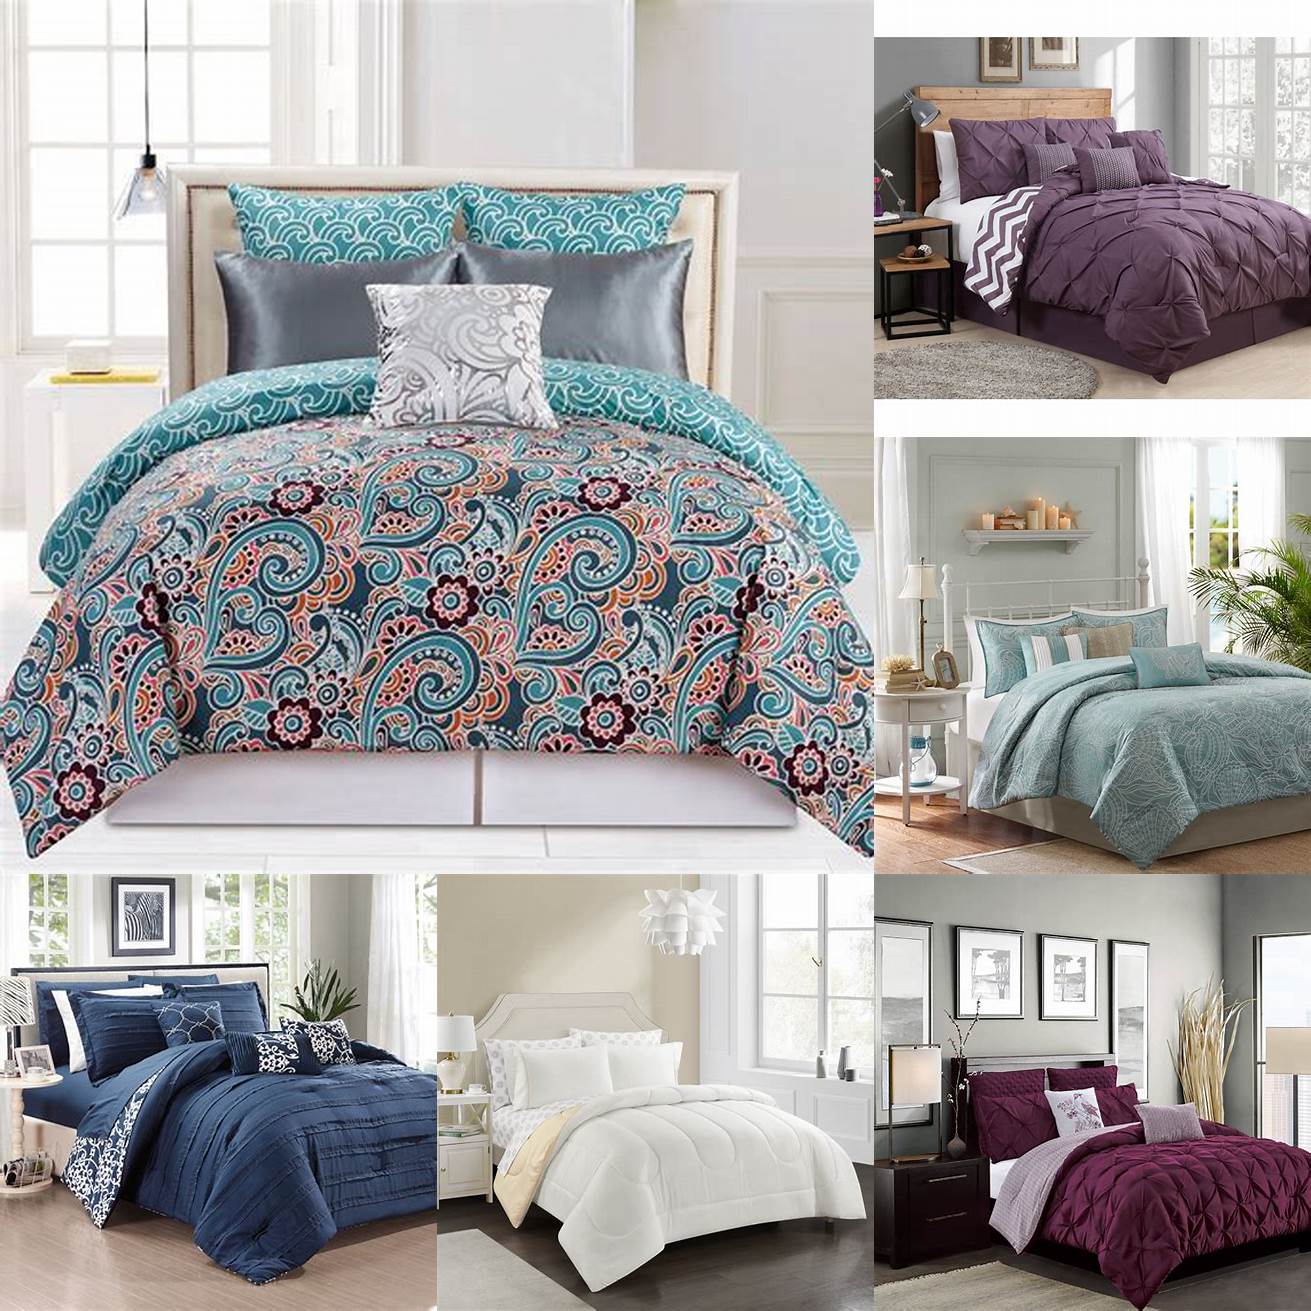 6 A Queen Bed Set with a reversible comforter